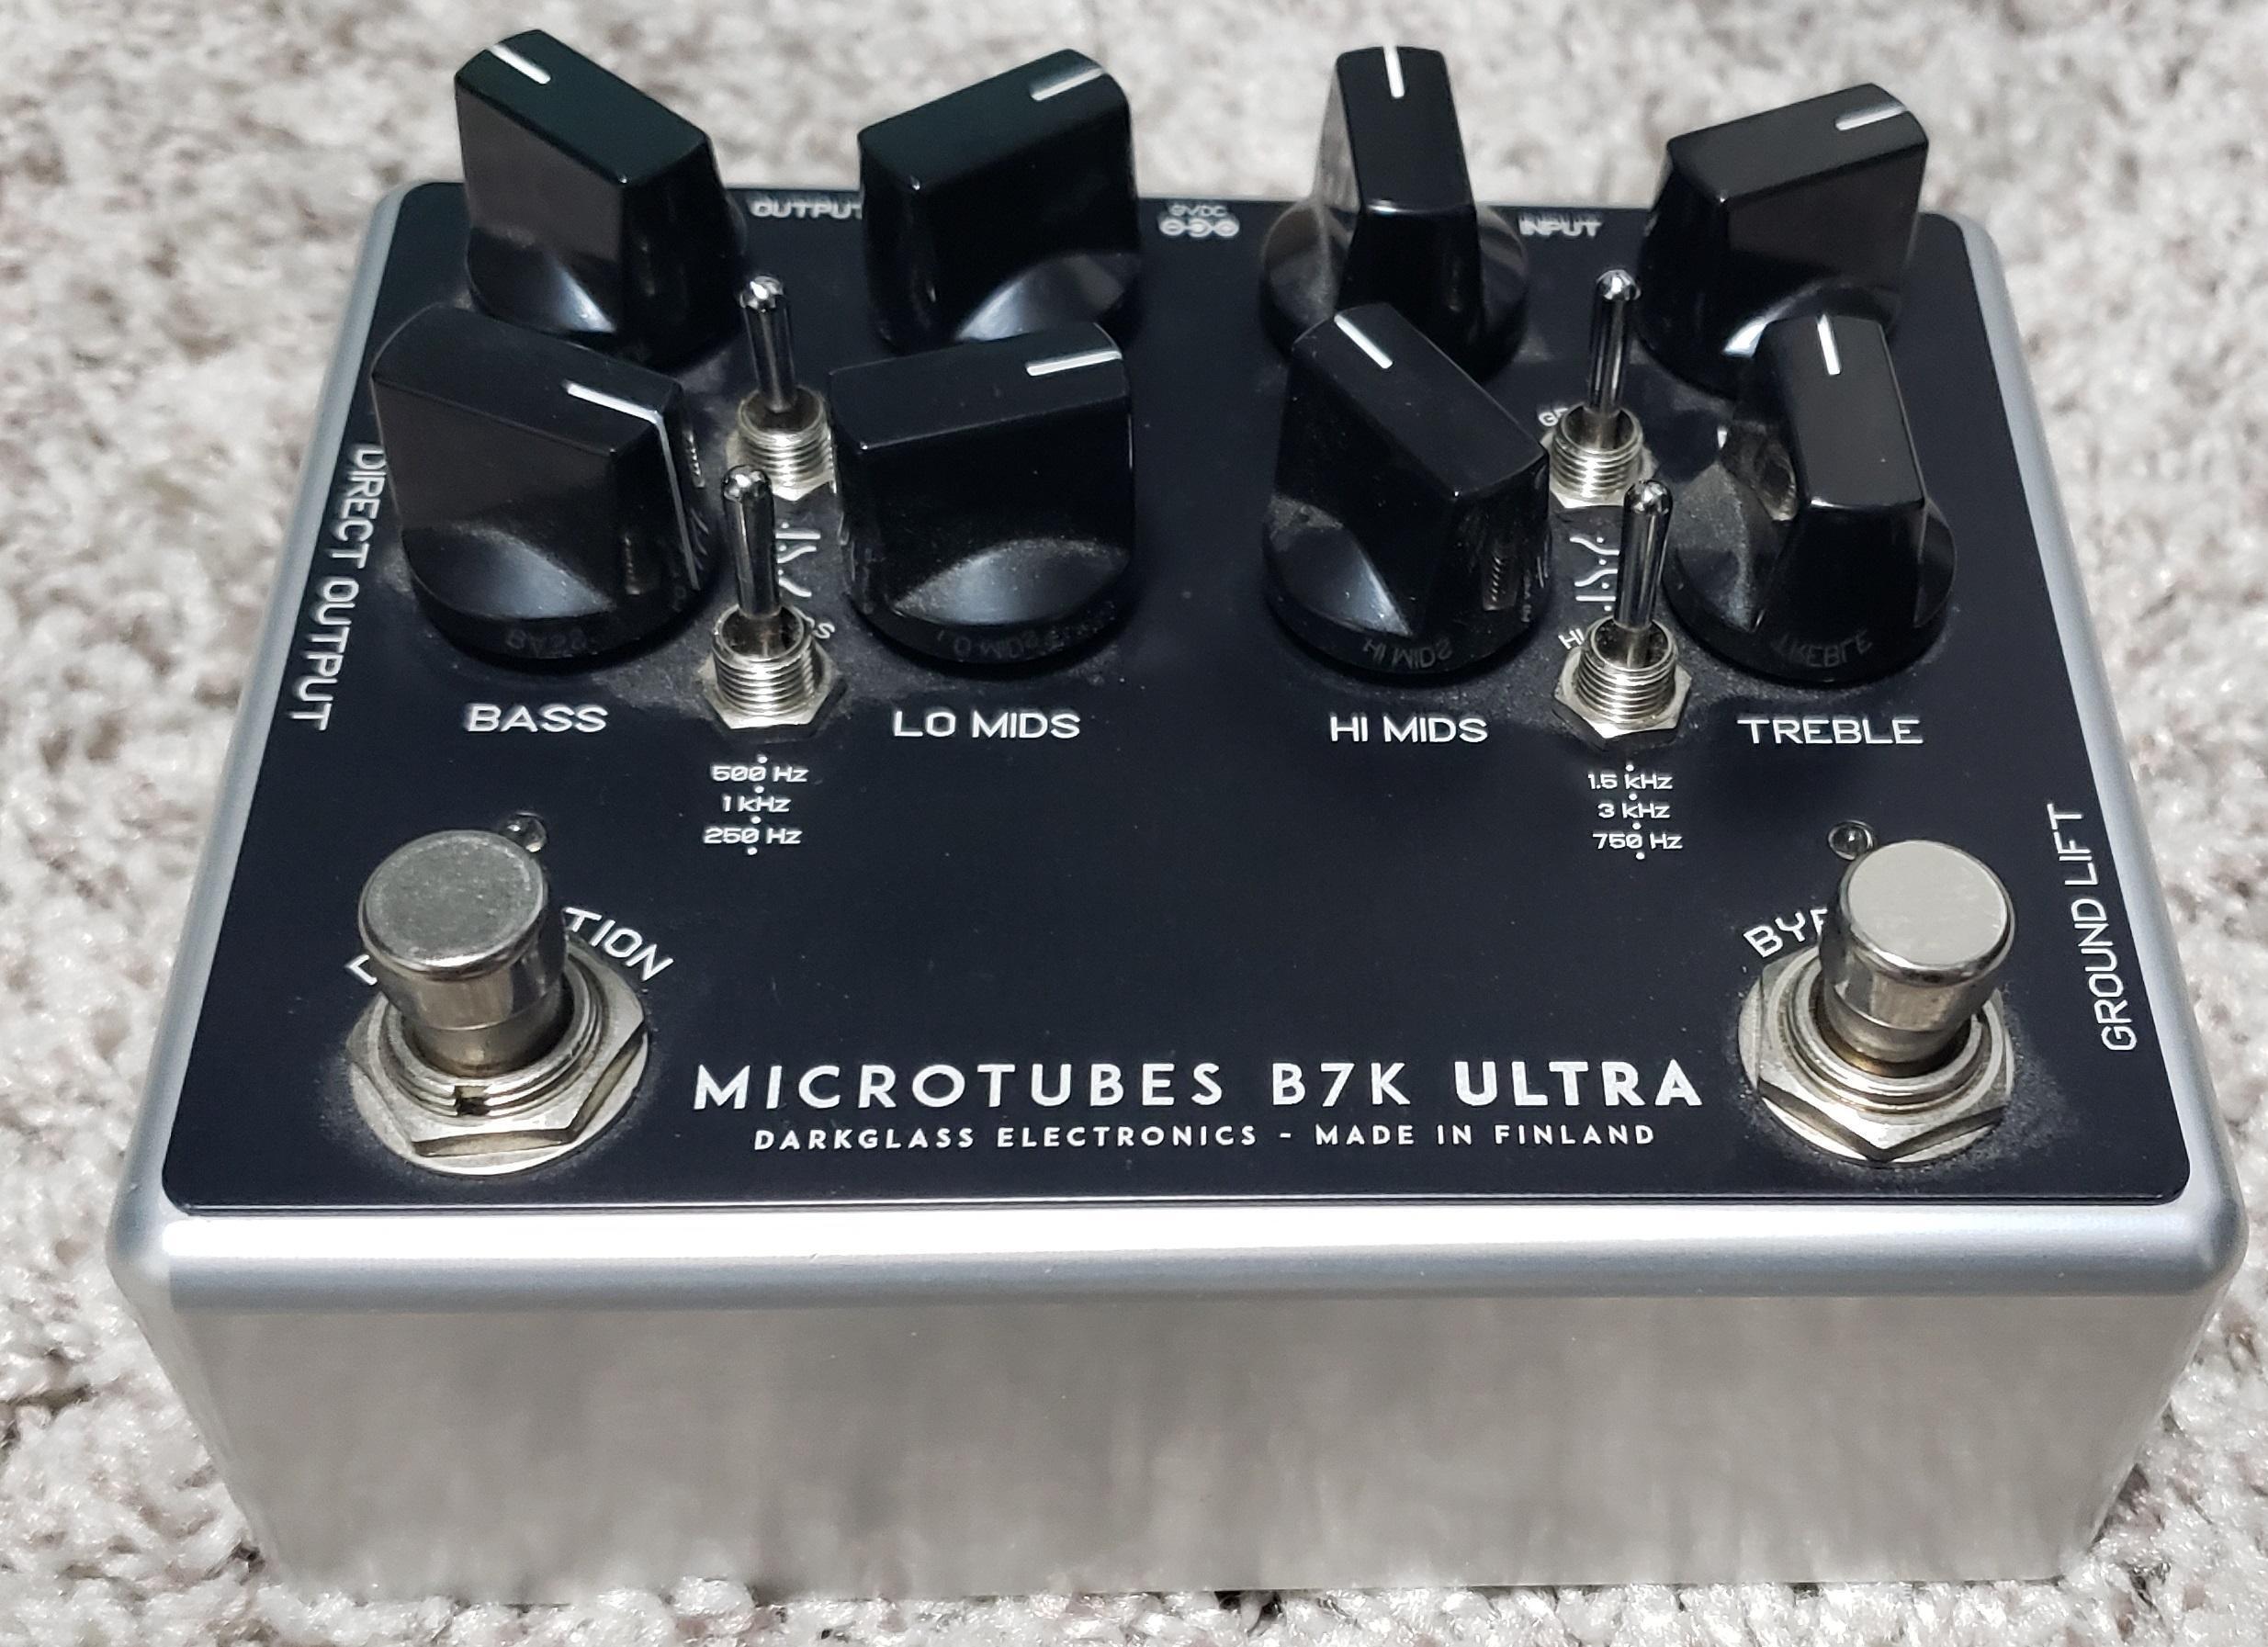 Used Darkglass Microtubes B7K Ultra - Sweetwater's Gear Exchange